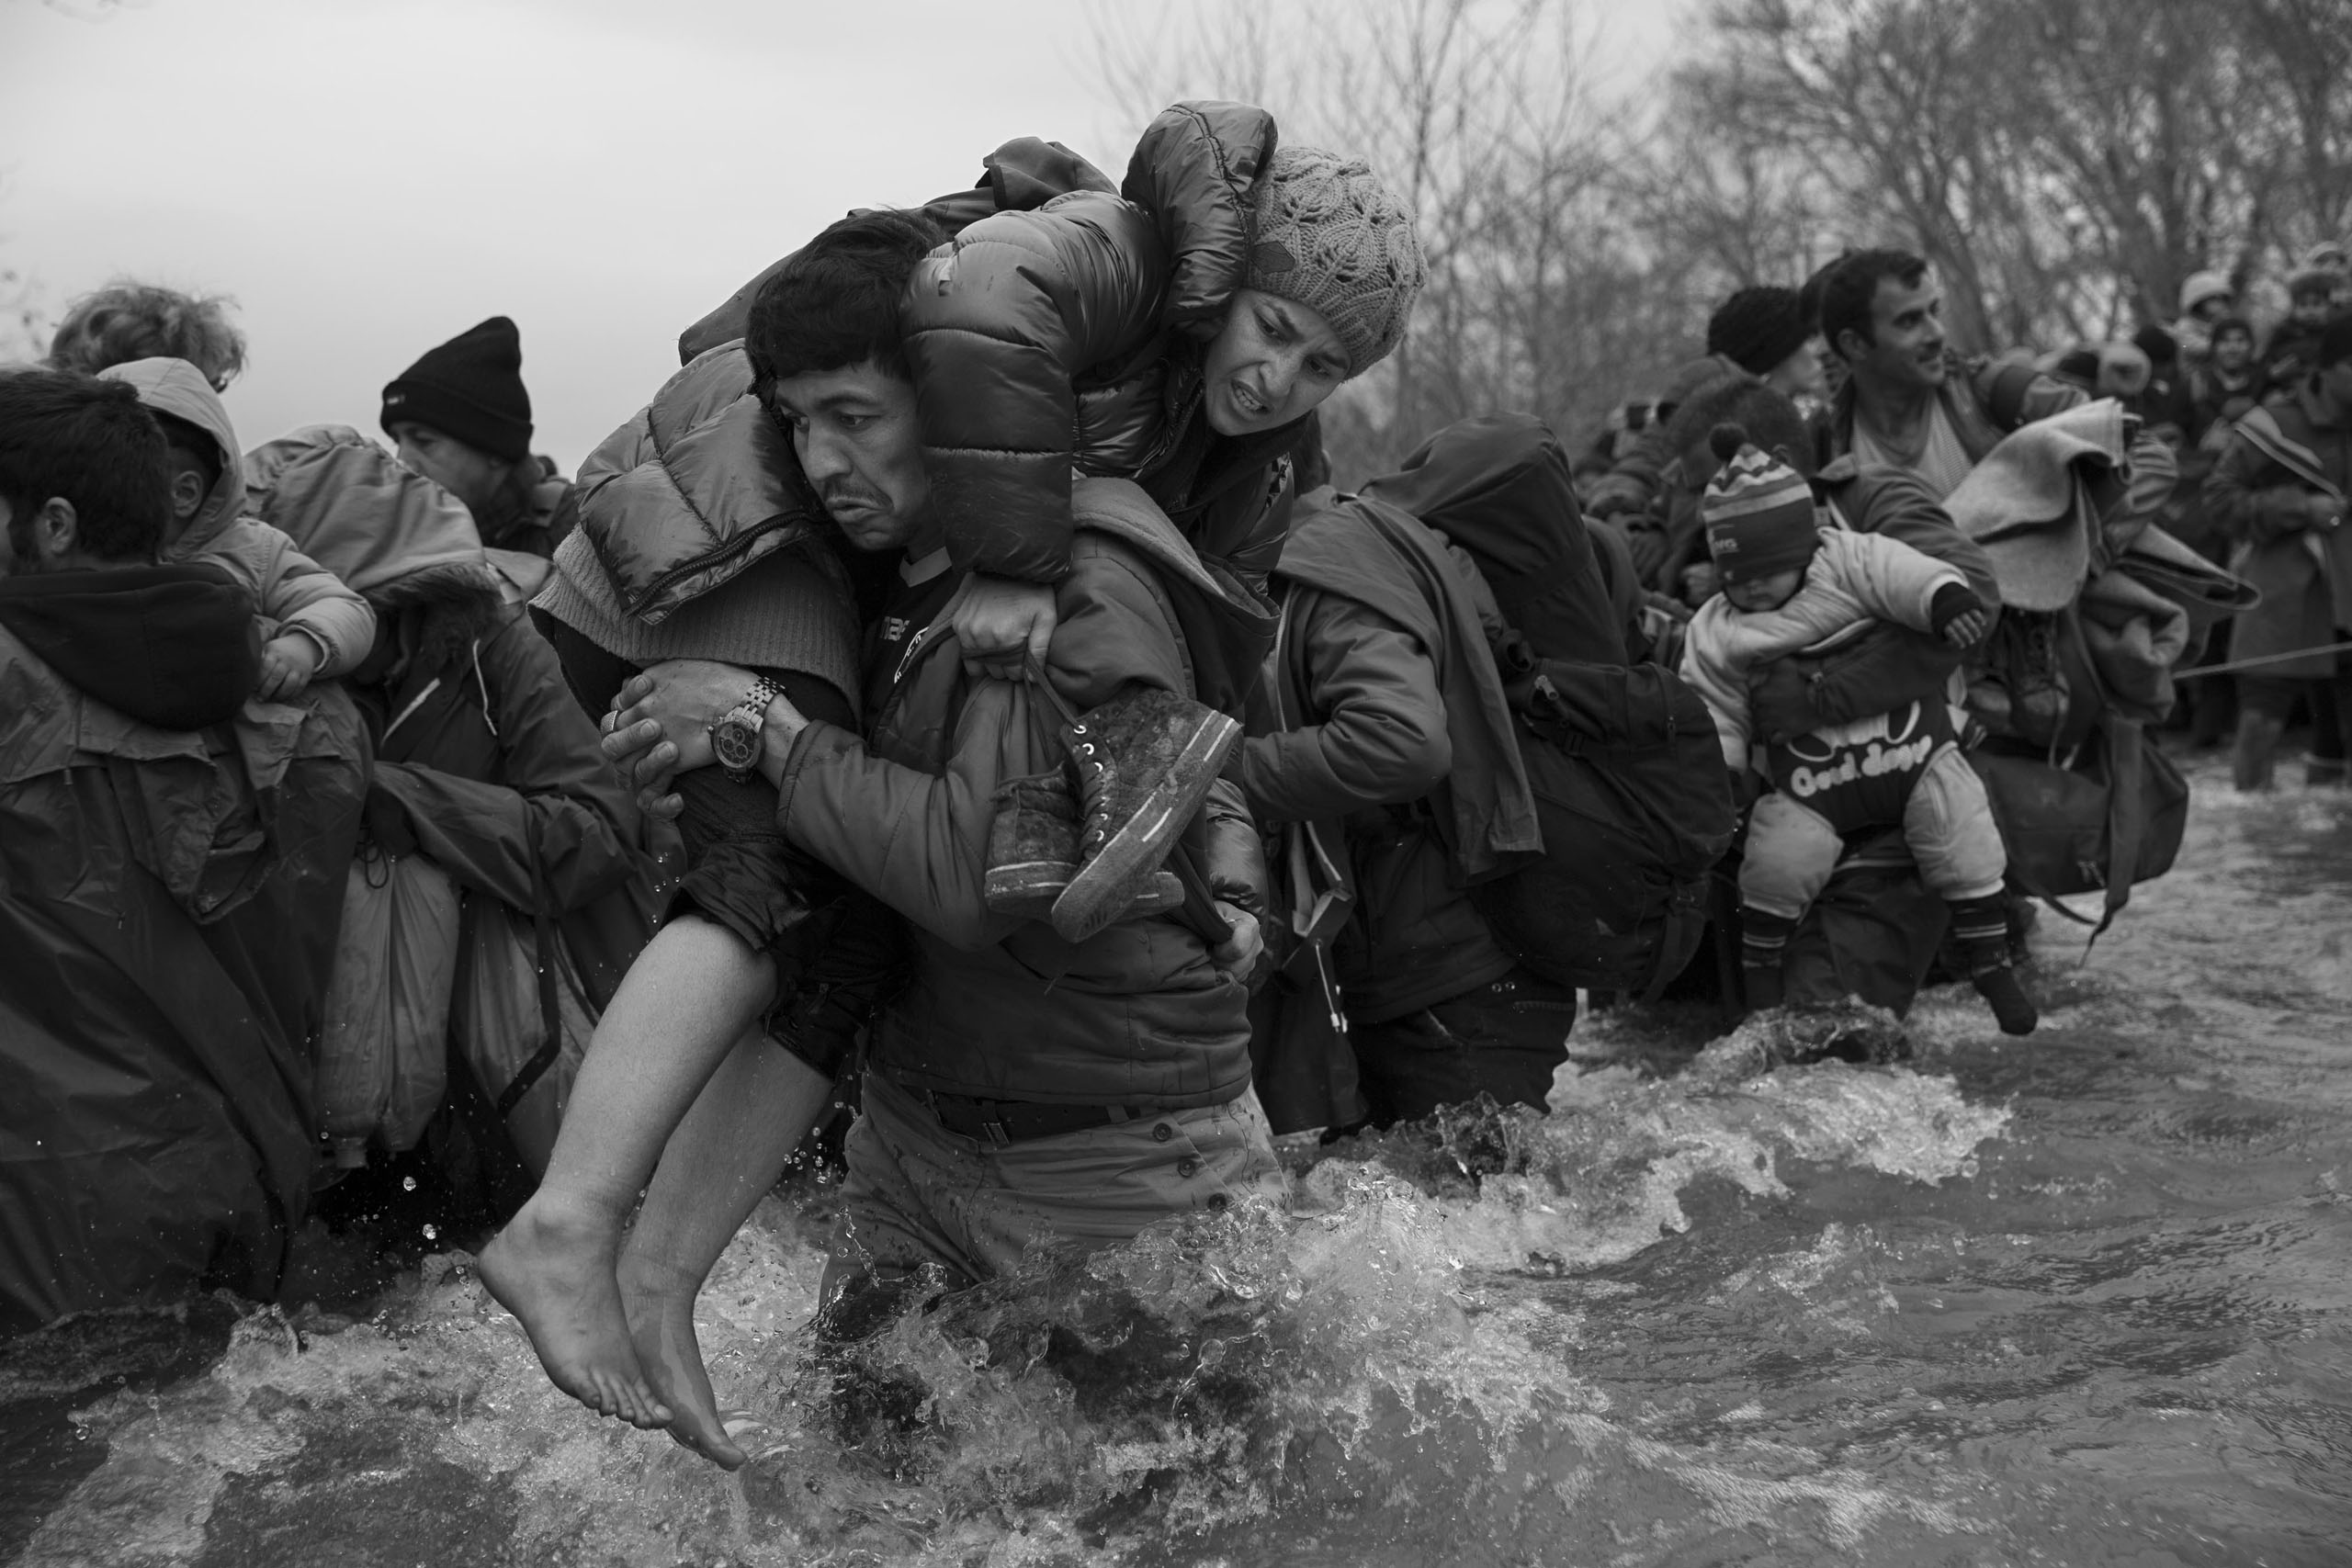 An estimated 1,000 migrants made their way from the camp in
                      Idomeni, Greece and crossed a river near the border in the hopes of crossing into Macedonia (James Nachtwey for TIME)